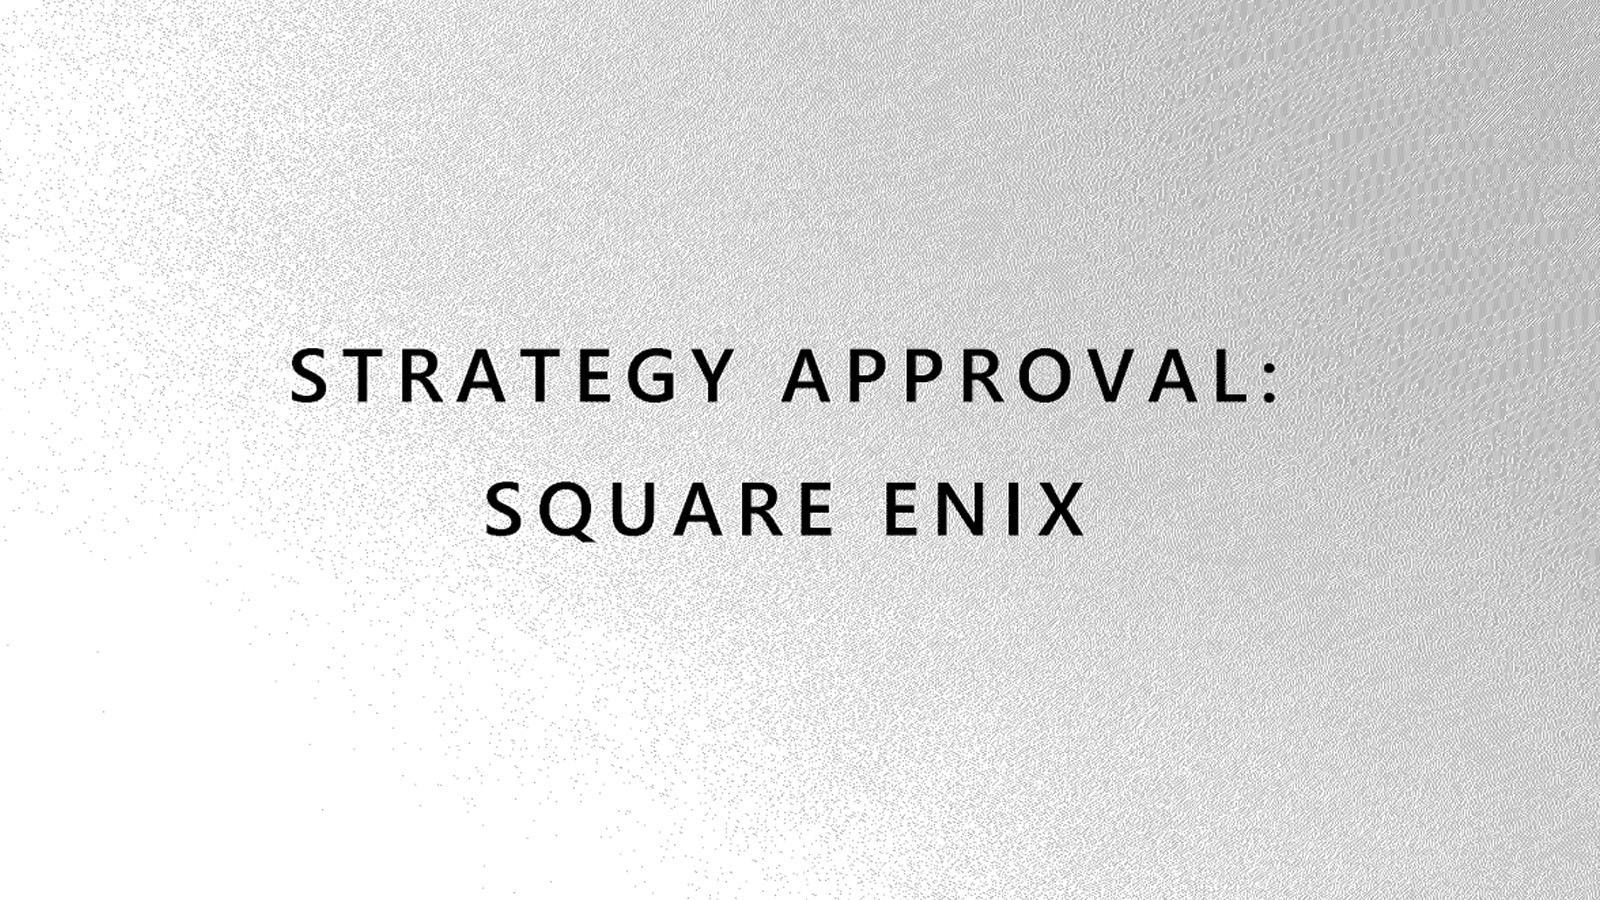 Microsoft wanted to acquire Square Enix as part of plan for mobile